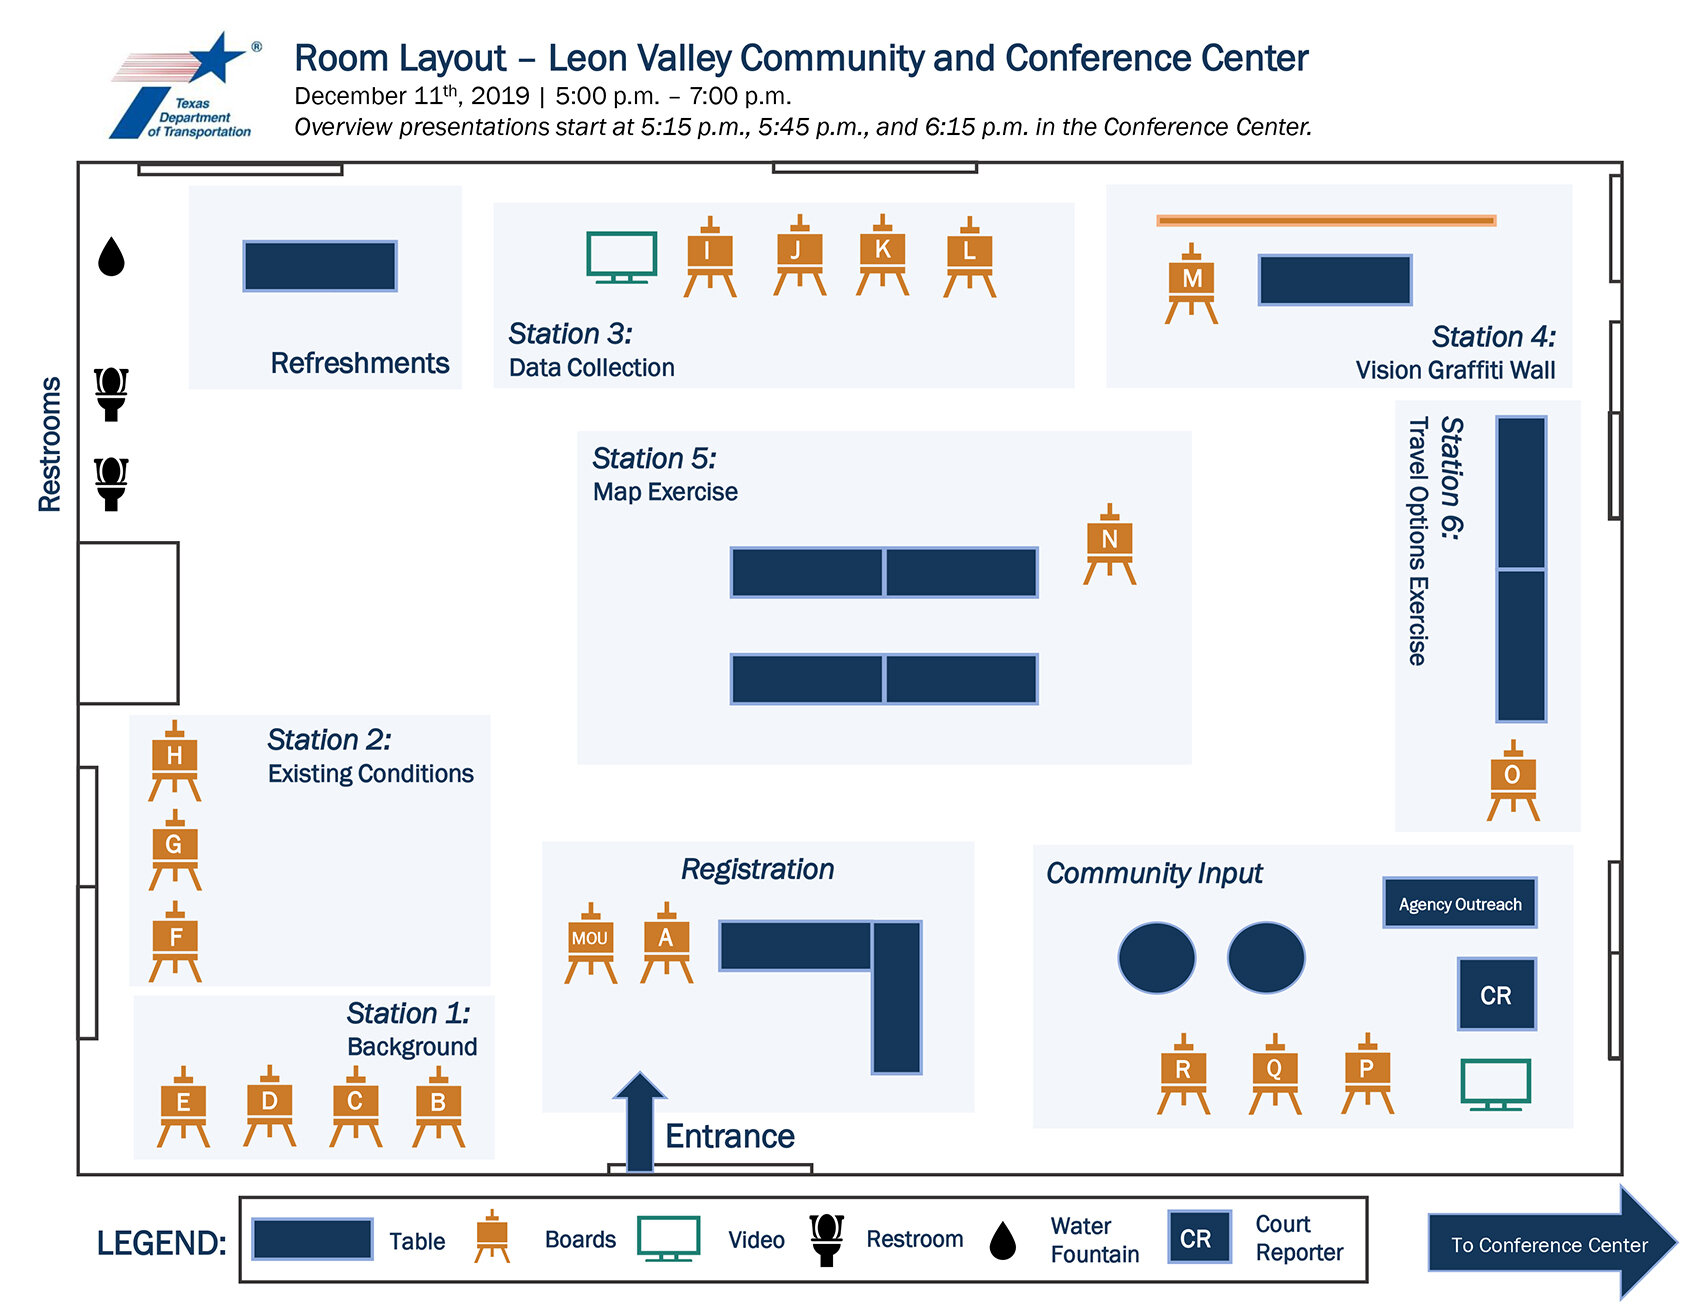  The layouts for the two venues hosting the in-person public meetings have been provided to illustrate how information was presented to the public. 